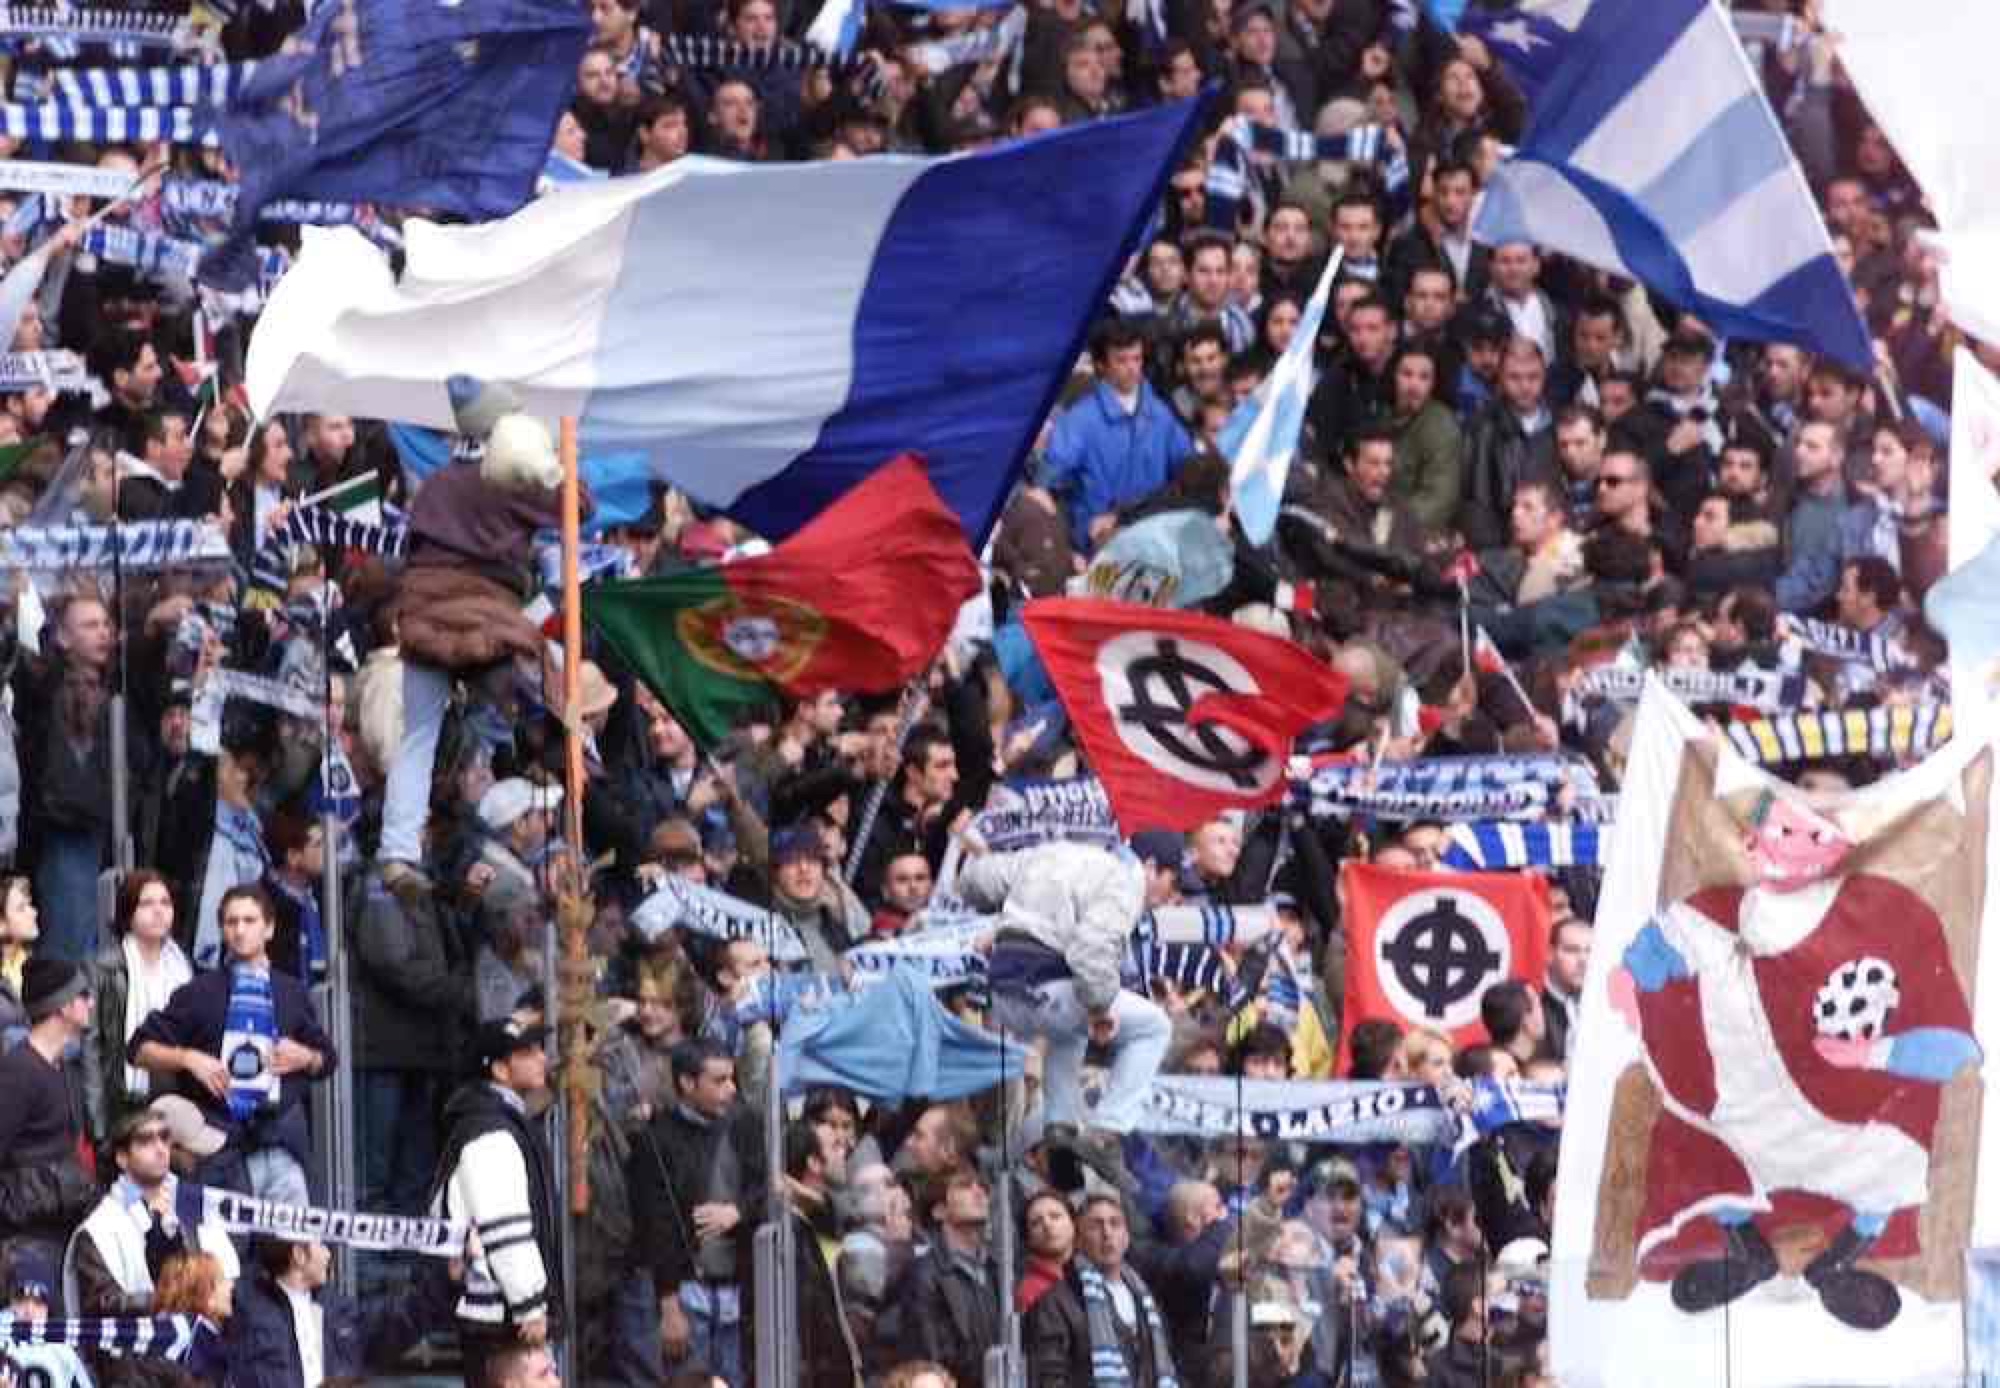 S.S. Lazio fans, known as the <em>Irriducibili</em>, fly neo-Nazi flags during the derby against A. C. Roma at the Olympic Stadium, 21 November 1999. The <em>Irriducibili</em> were dissolved in 2020.